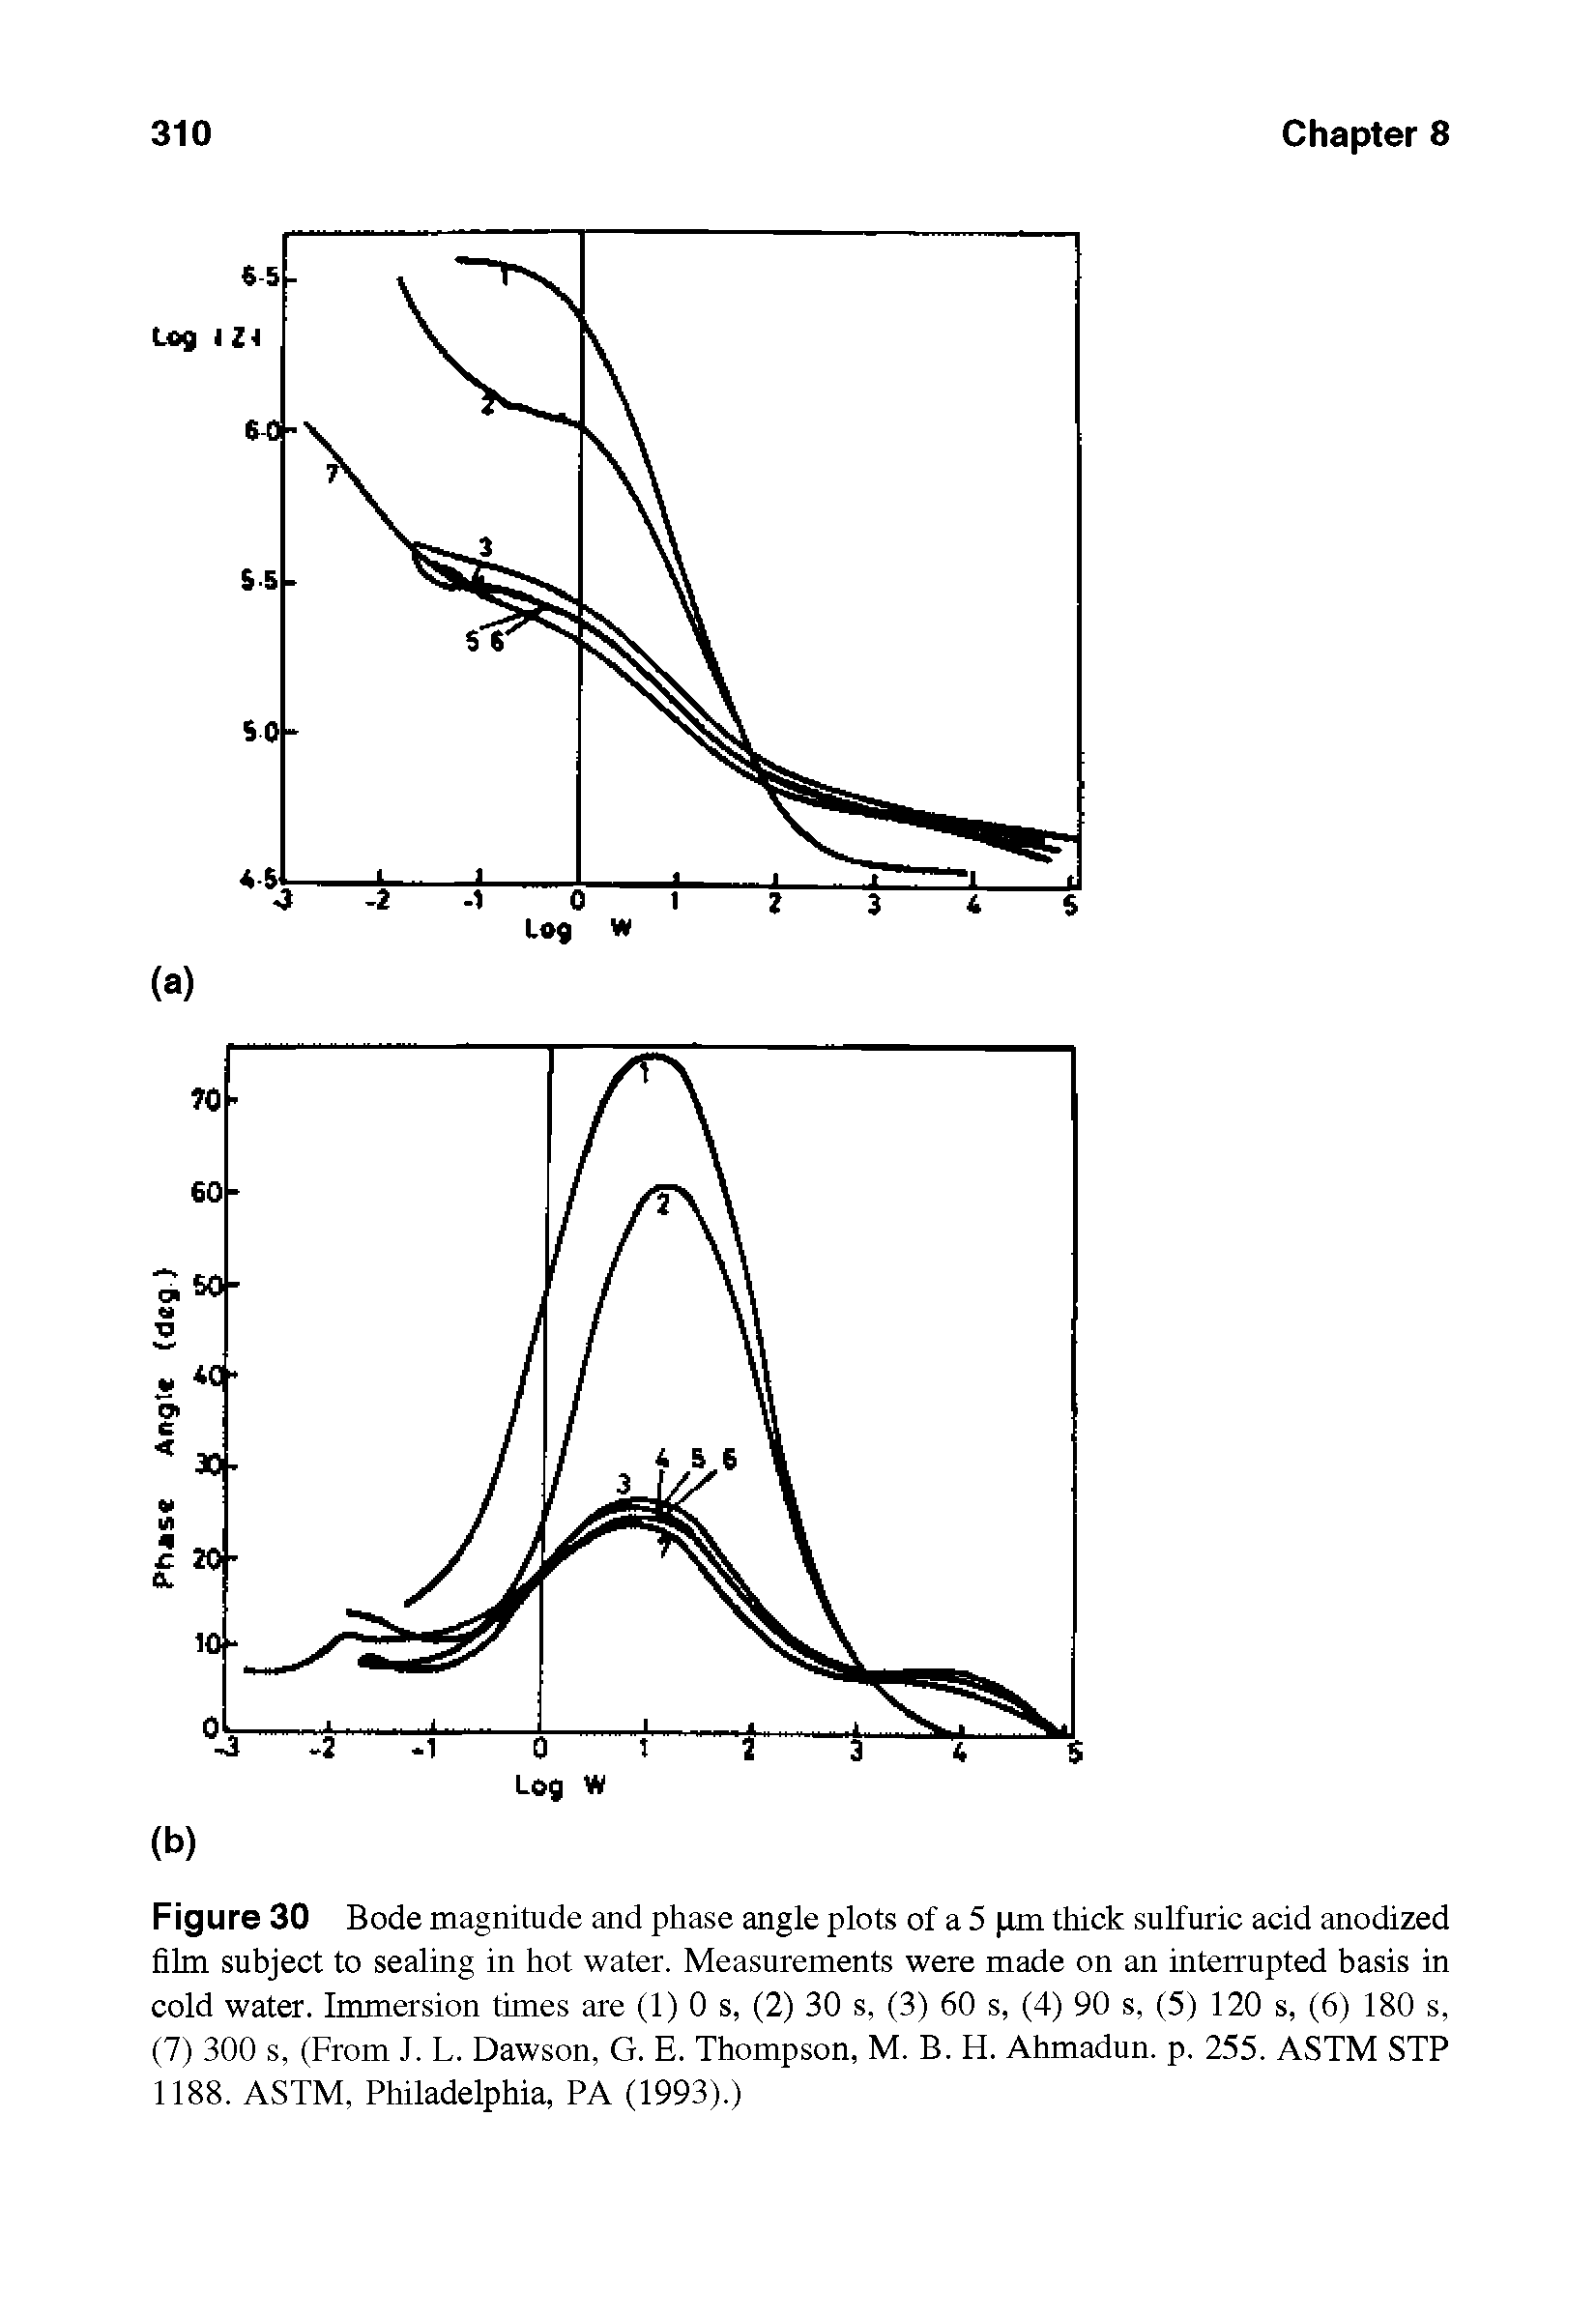 Figure 30 Bode magnitude and phase angle plots of a 5 im thick sulfuric acid anodized film subject to sealing in hot water. Measurements were made on an interrupted basis in cold water. Immersion times are (1) 0 s, (2) 30 s, (3) 60 s, (4) 90 s, (5) 120 s, (6) 180 s, (7) 300 s, (From J. L. Dawson, G. E. Thompson, M. B. H. Ahmadun. p. 255. ASTM STP 1188. ASTM, Philadelphia, PA (1993).)...